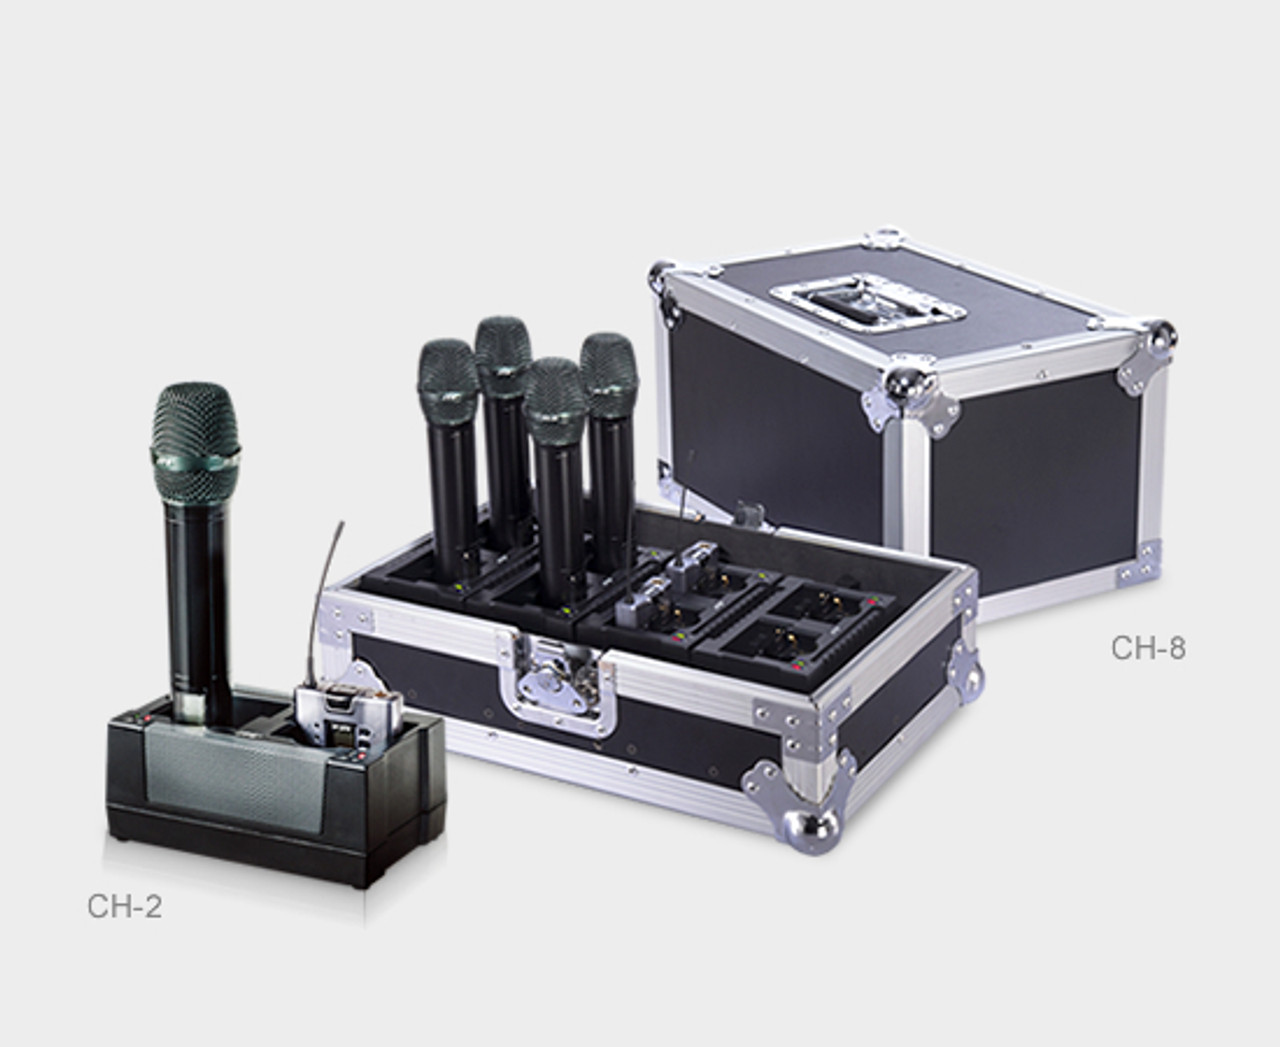 JTS UF-20R 2-CH UHF Wideband Wireless Microphone System (624-694Mhz)